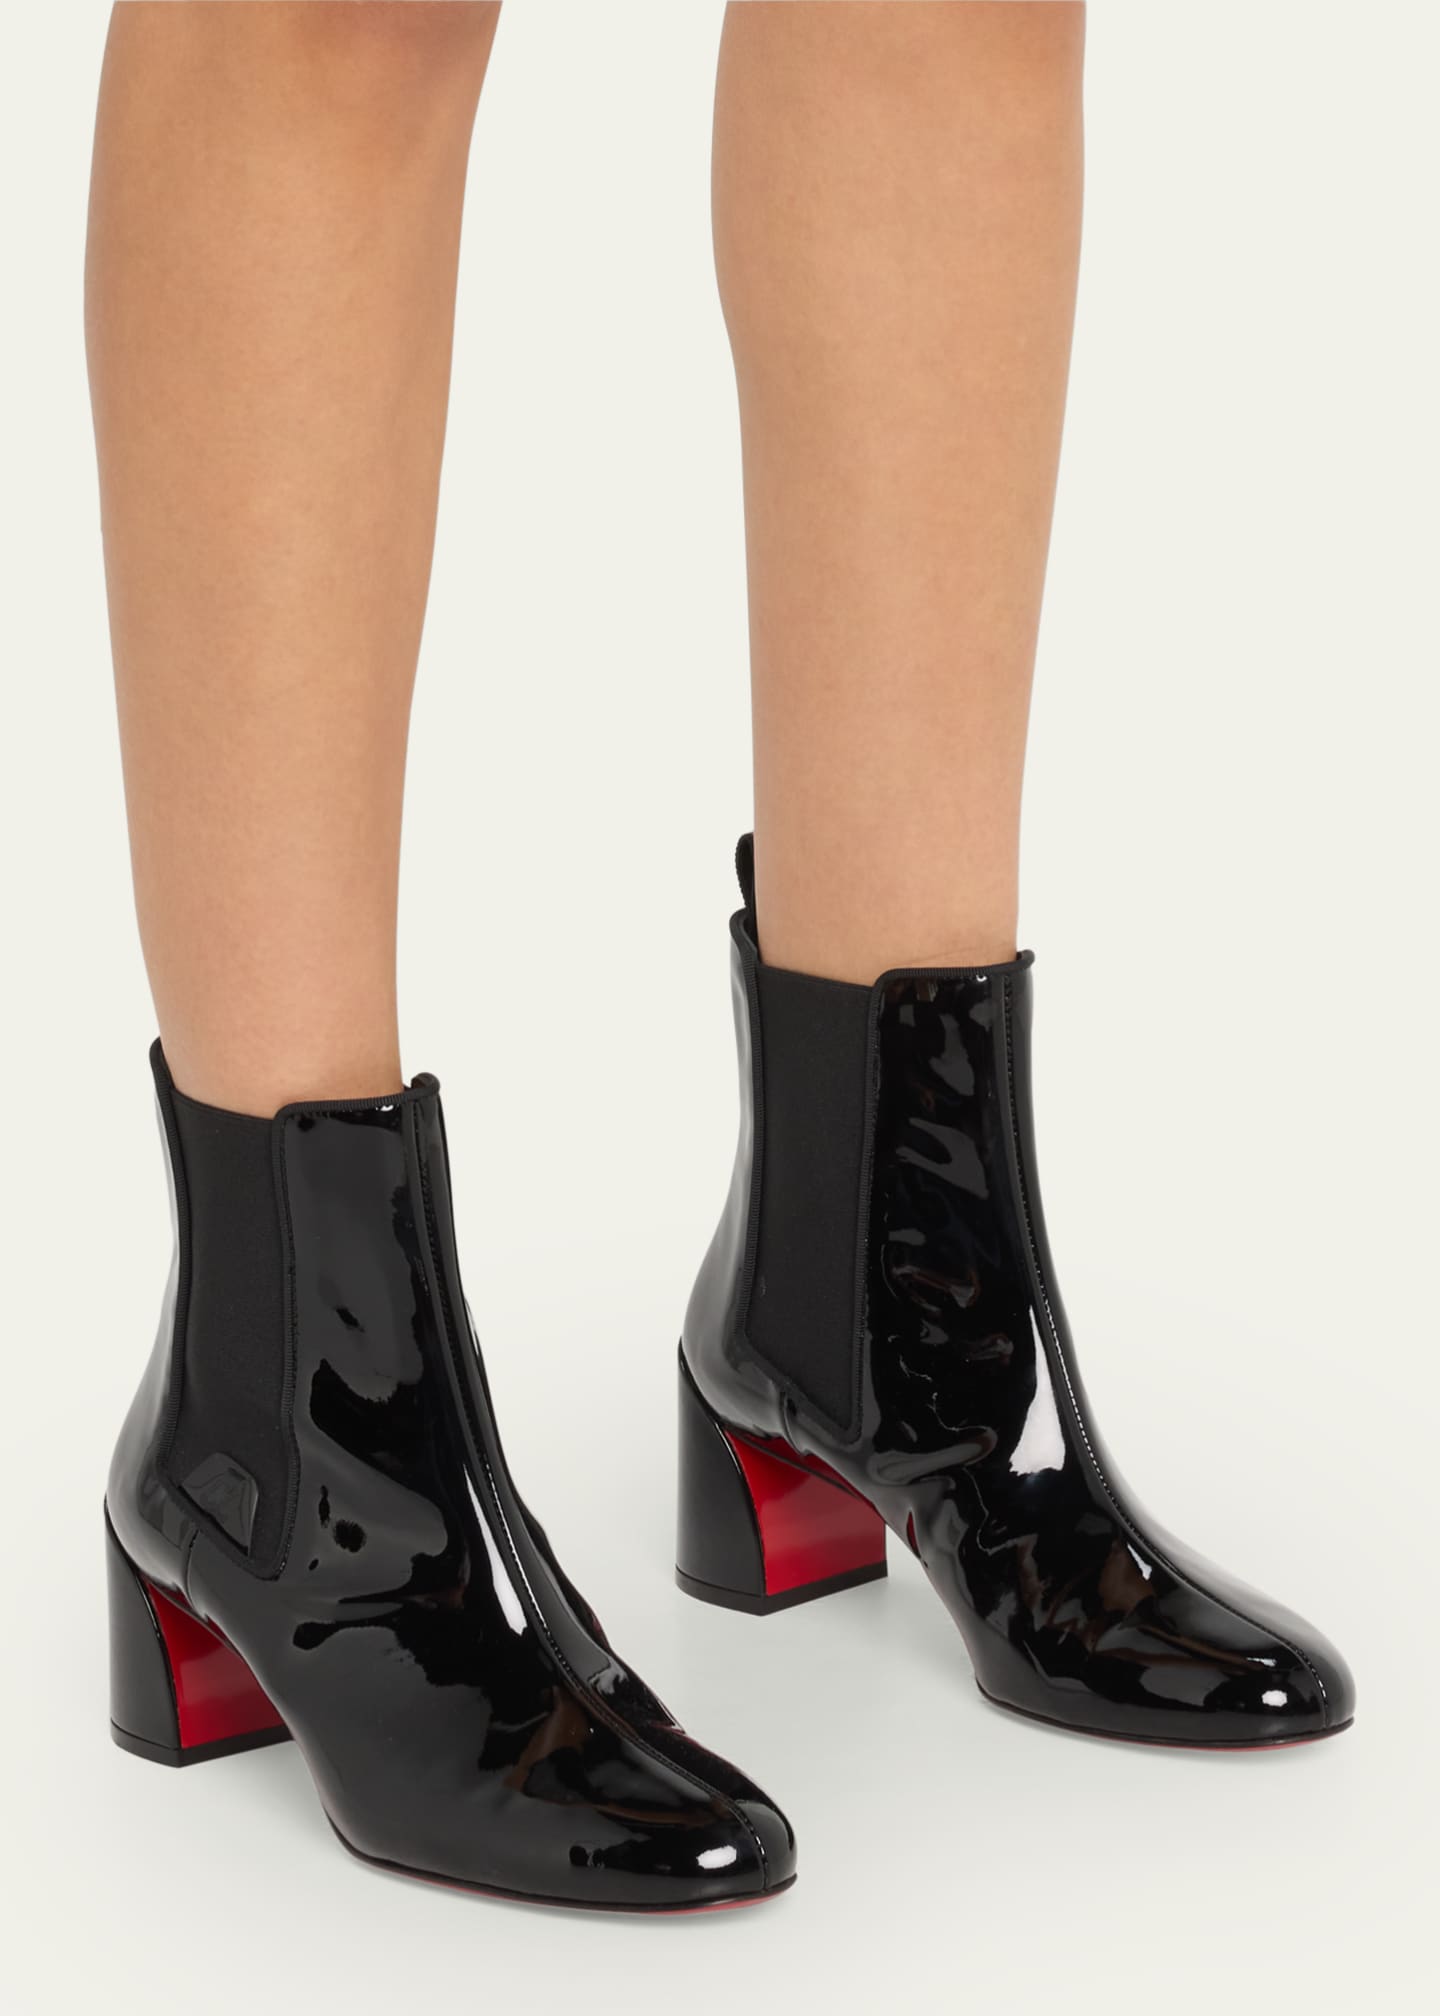 Christian Louboutin, Shoes, Christian Louboutin Patent Leather Boots